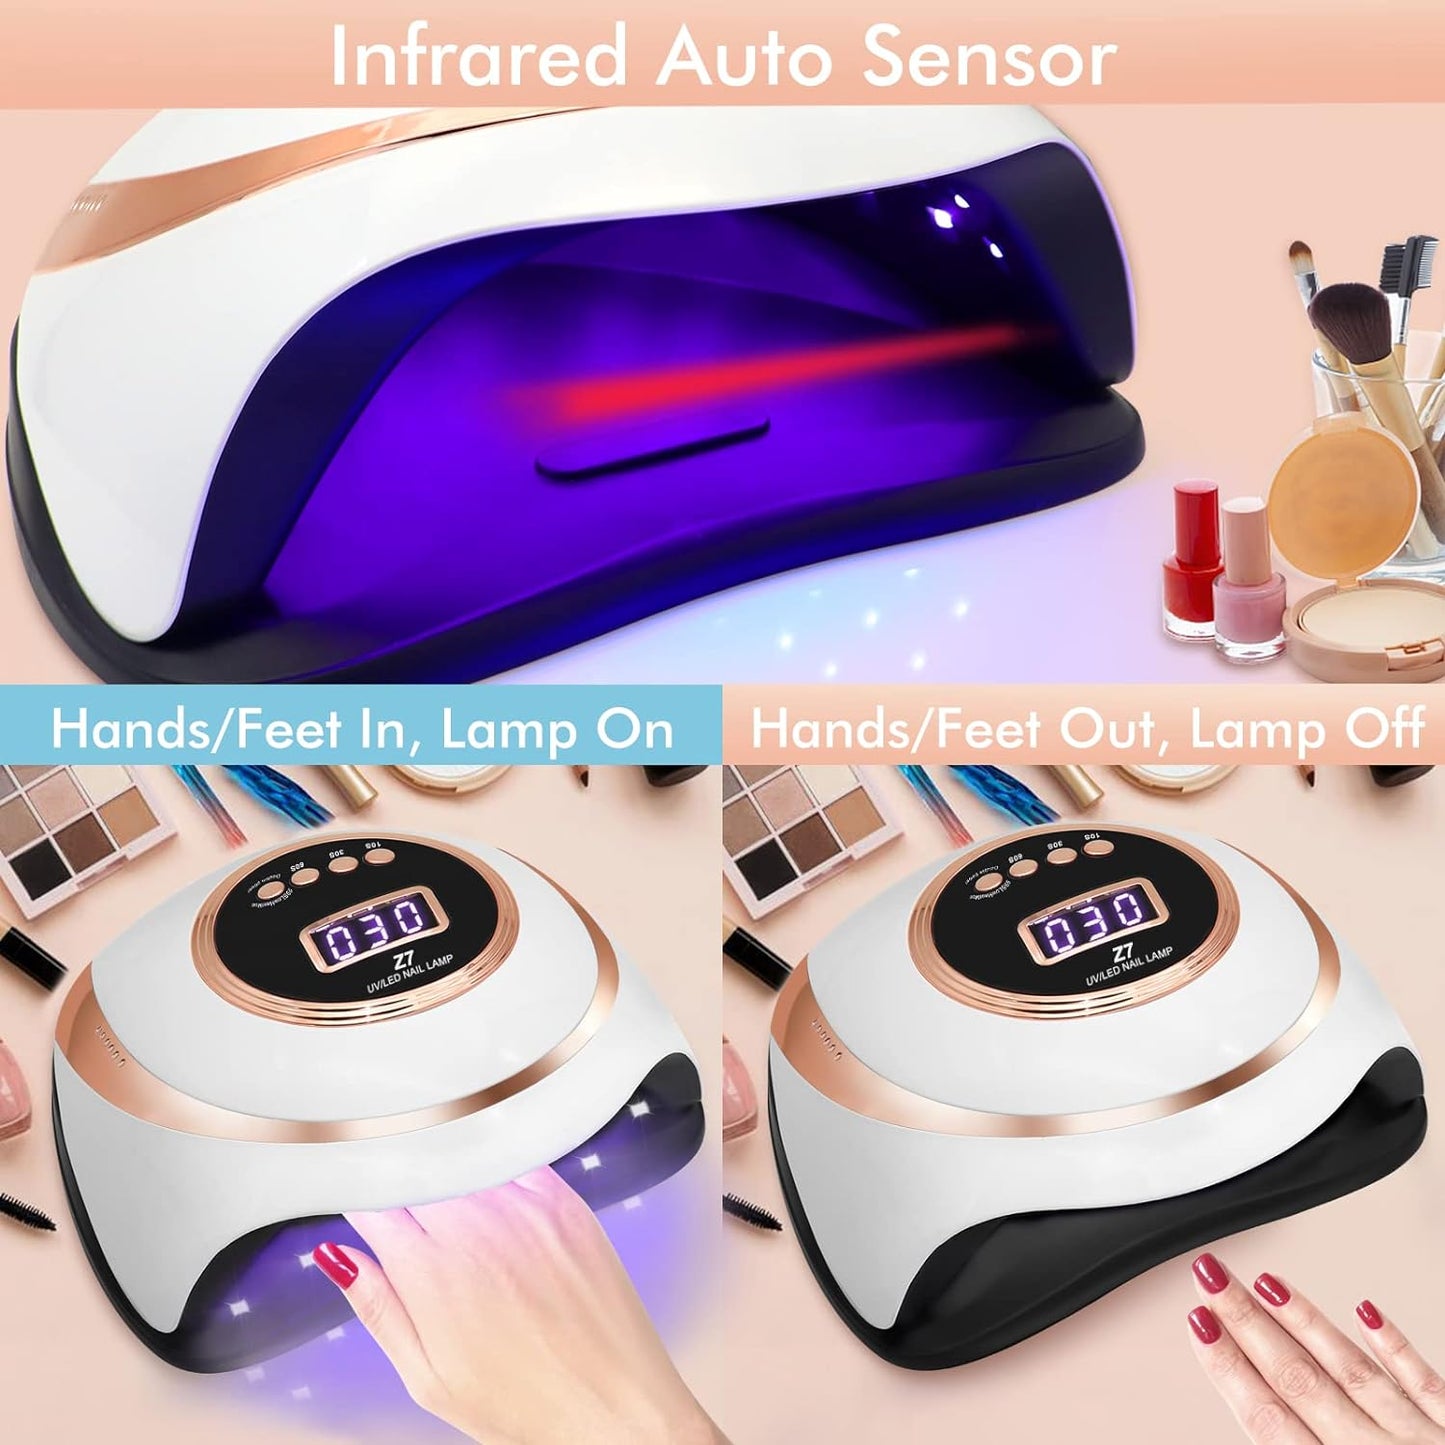 180W Professional UV Nail Led Light for Fast Curing Dryer with 57pcs Beads 4 Timers Gel for Polish Kit Home Salon Art Tools